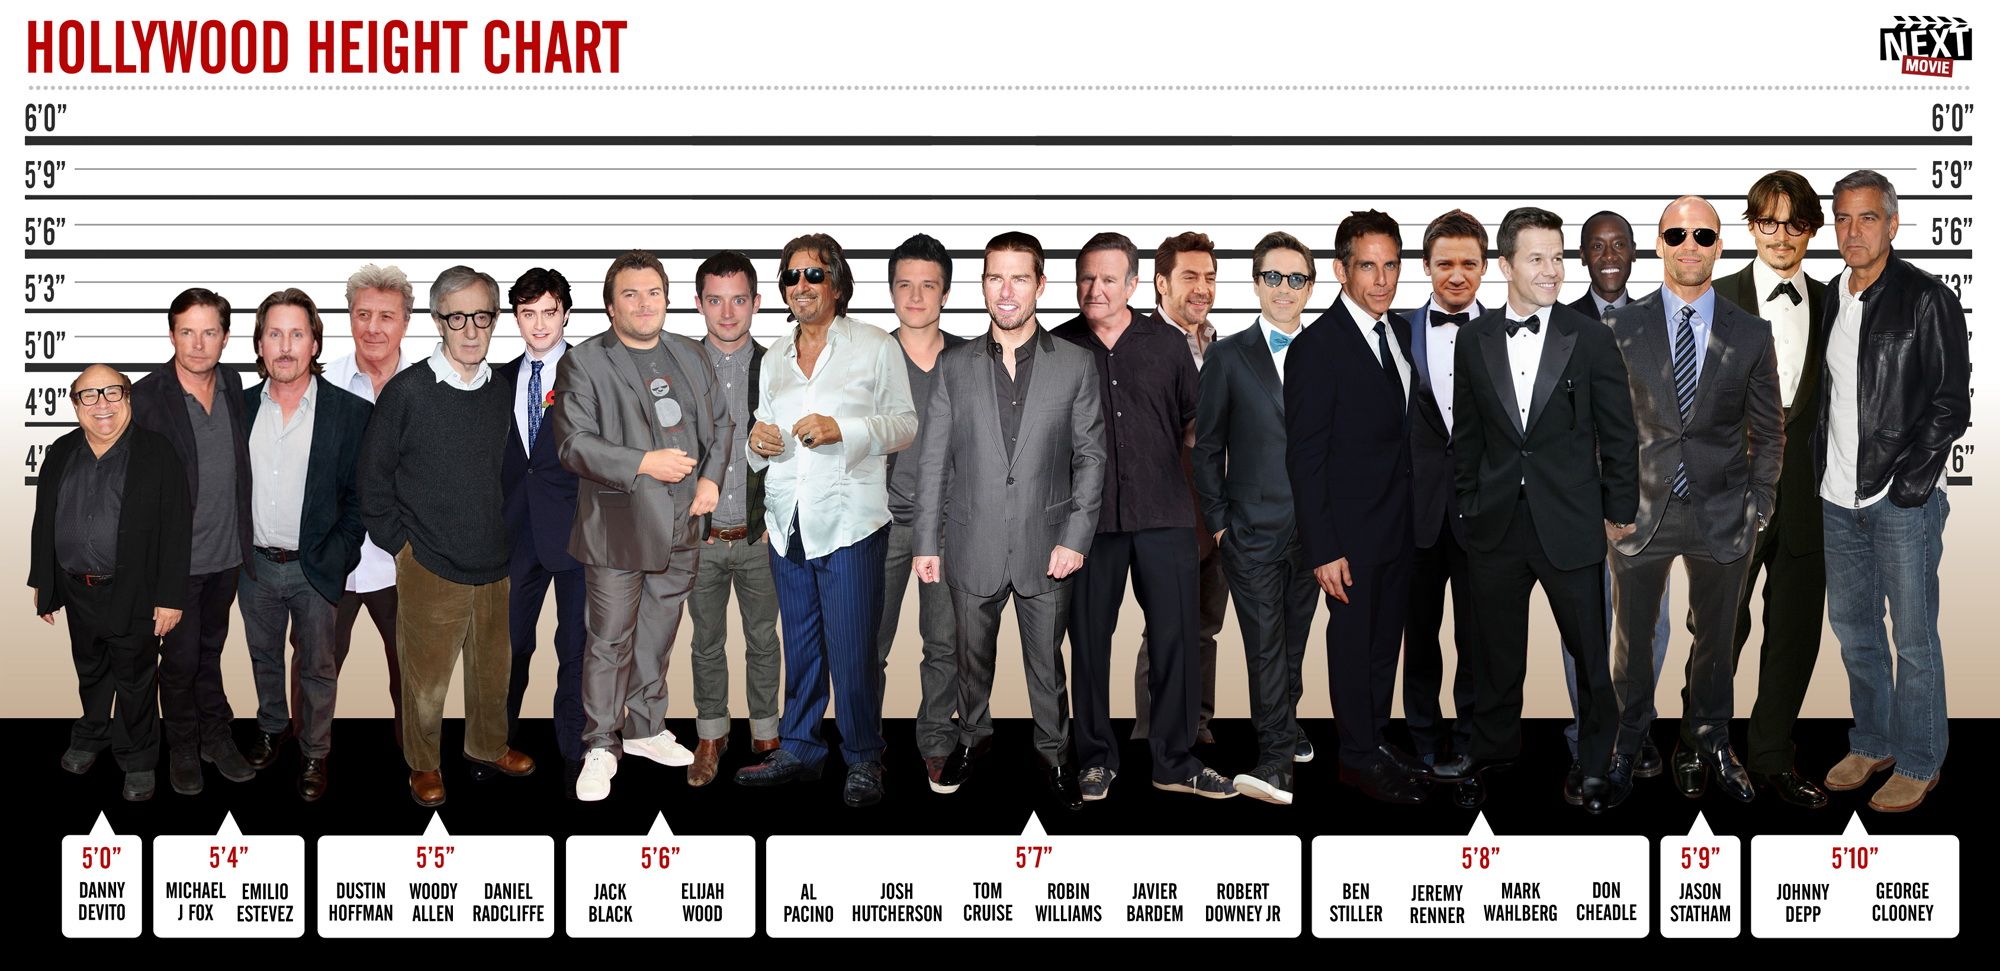 Men and height